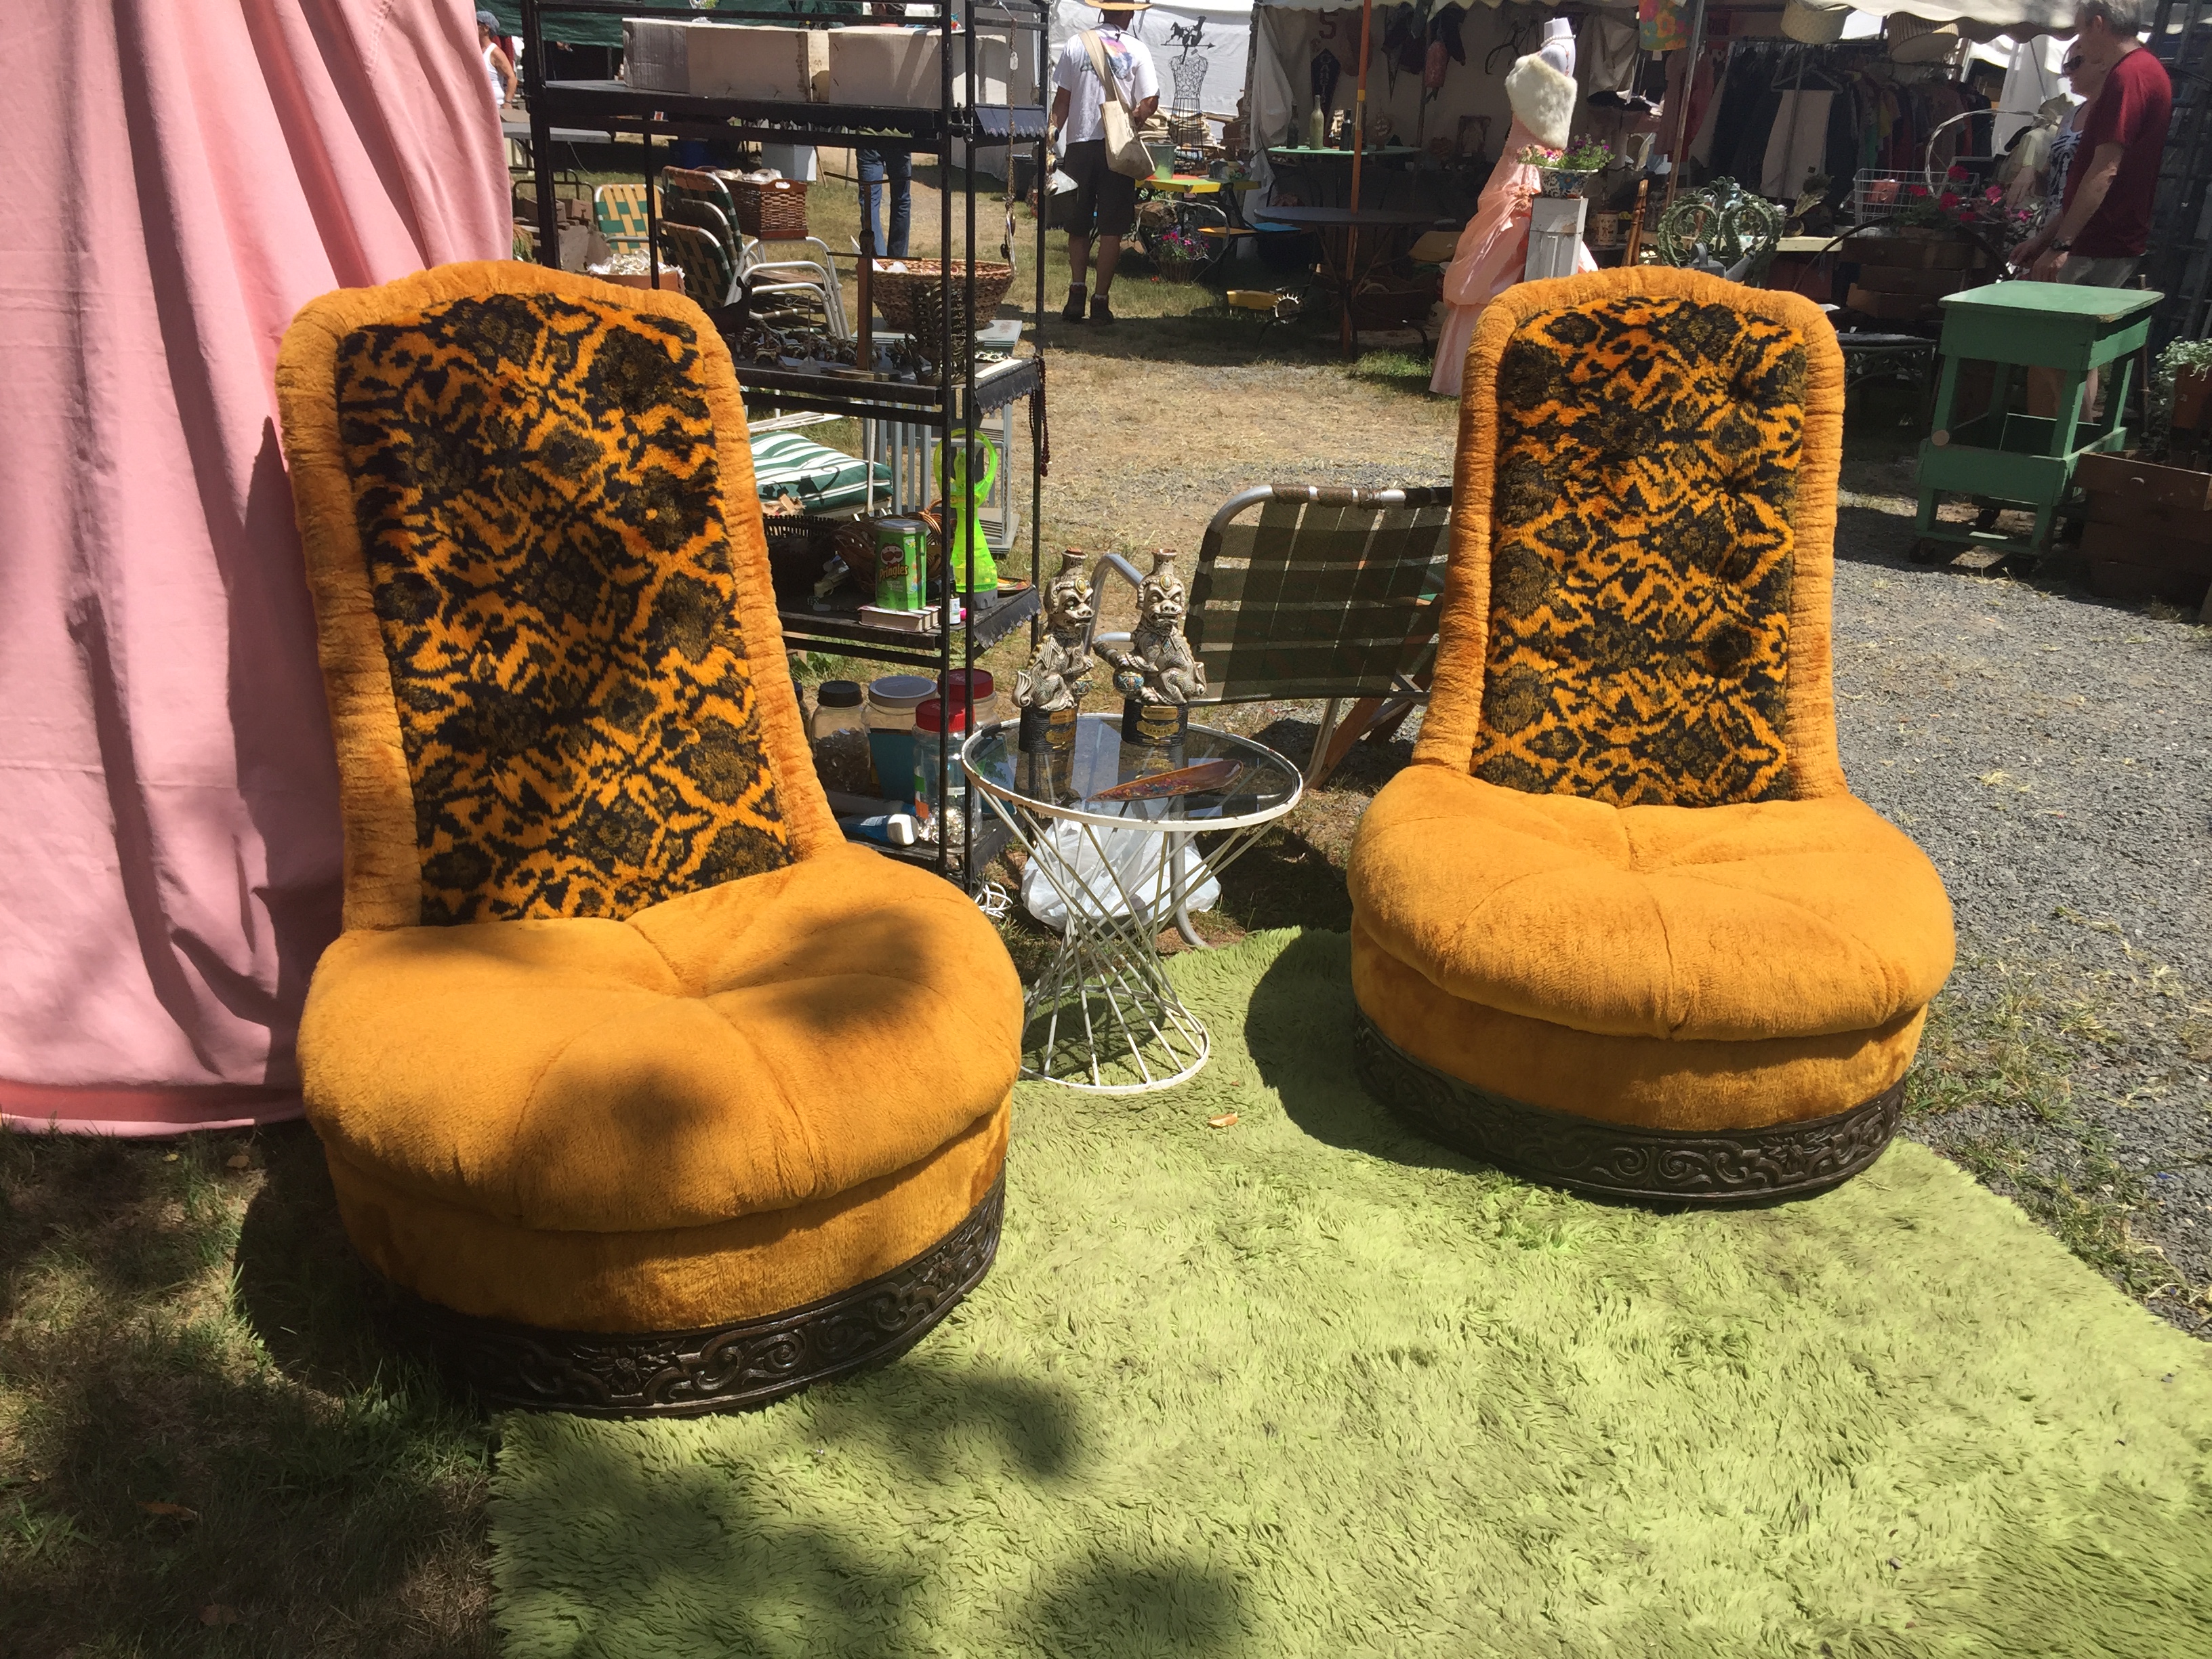 Upholstery Diy Flea Market Finds Kim, How To Diy Upholstery Chair